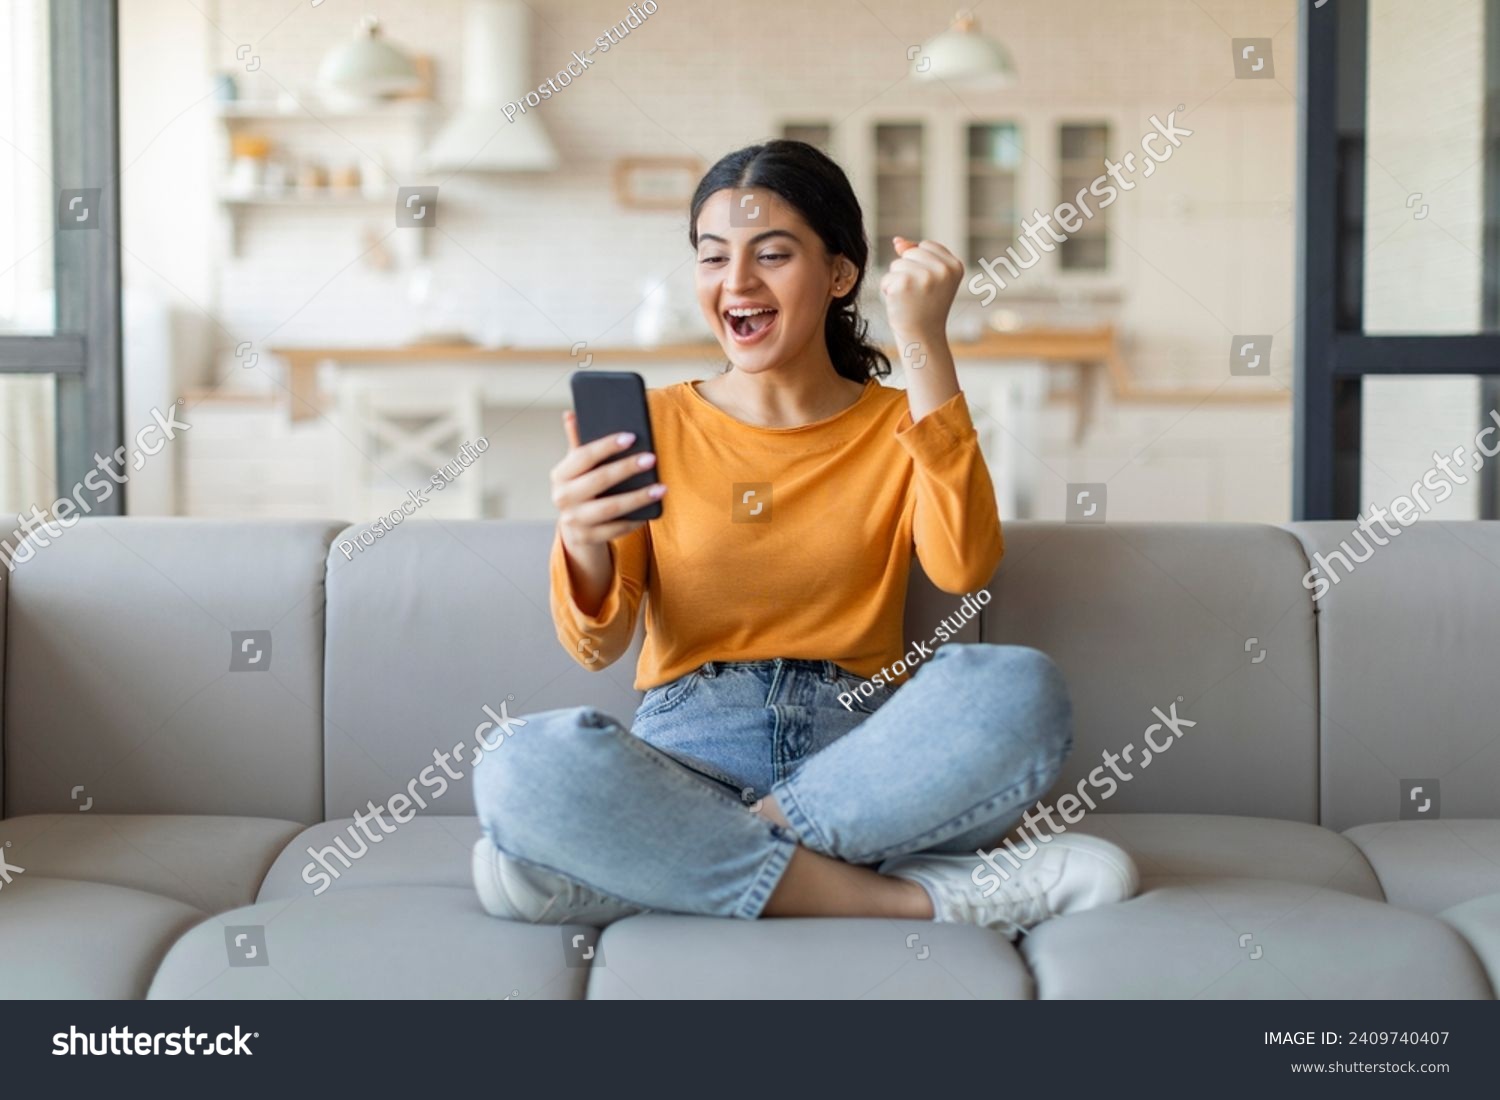 Joyful young indian woman with smartphone celebrating victory. happy excited female sitting on couch at home, holding mobile phone and shaking fist, cheering success and online win, got good news #2409740407